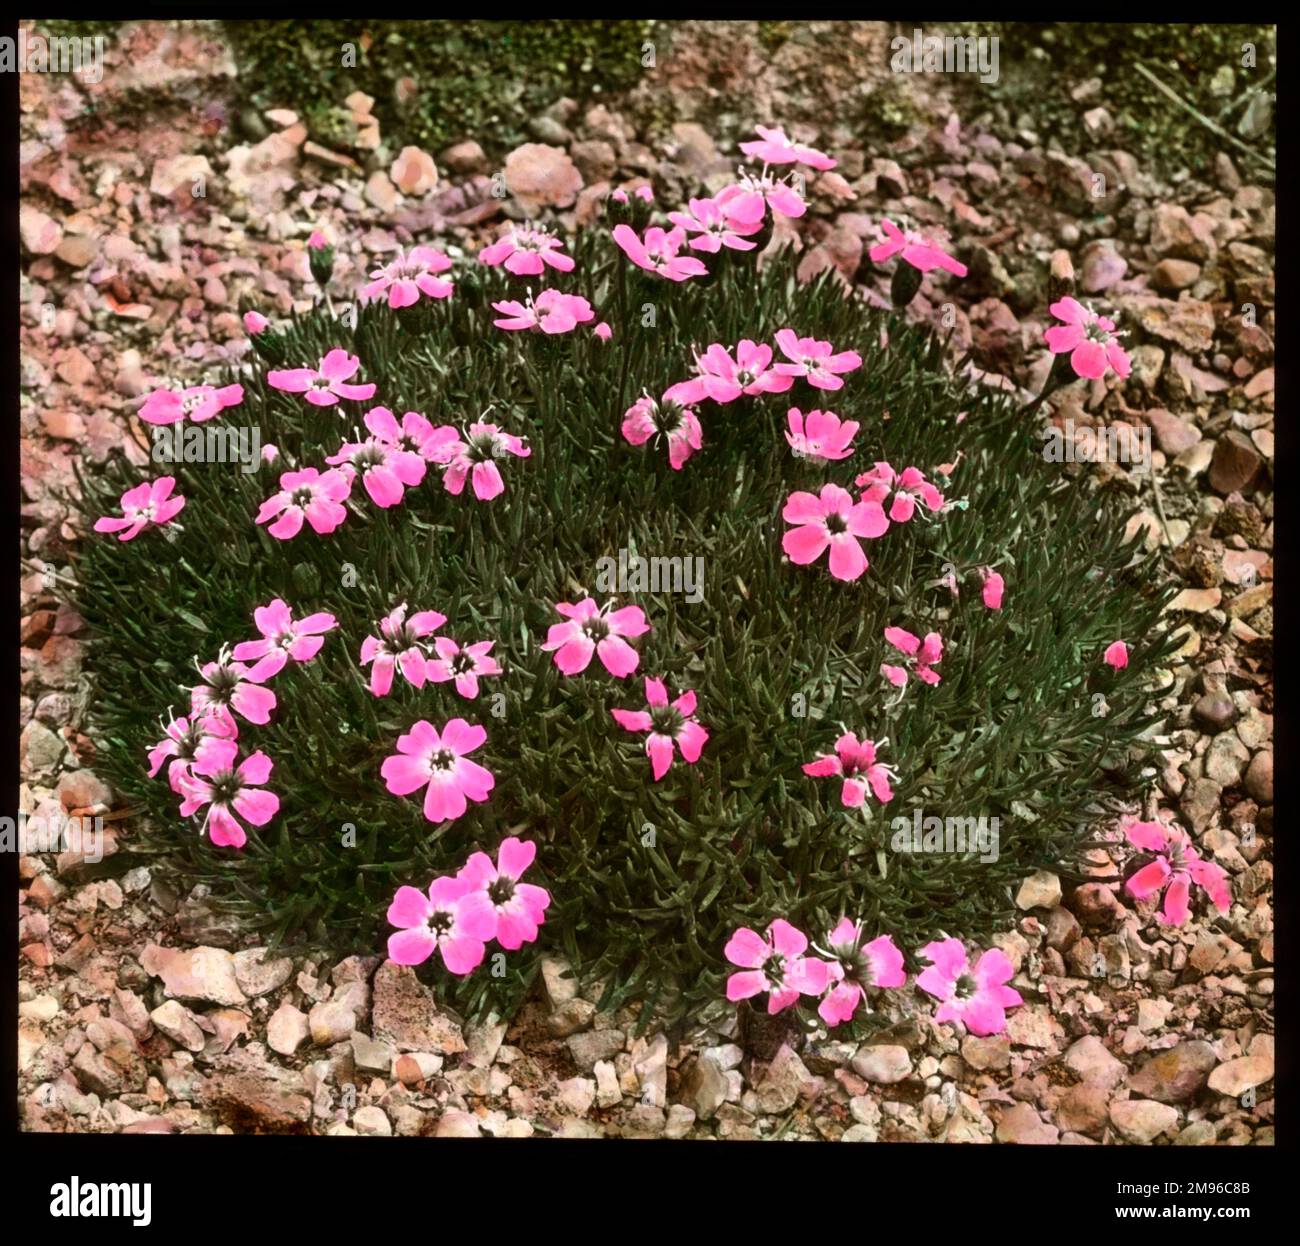 Silene Acaulis (Moss Campion), a mountain-dwelling wildflower of the Caryophyllaceae family, with pink flowers, growing in a rocky setting. Stock Photo